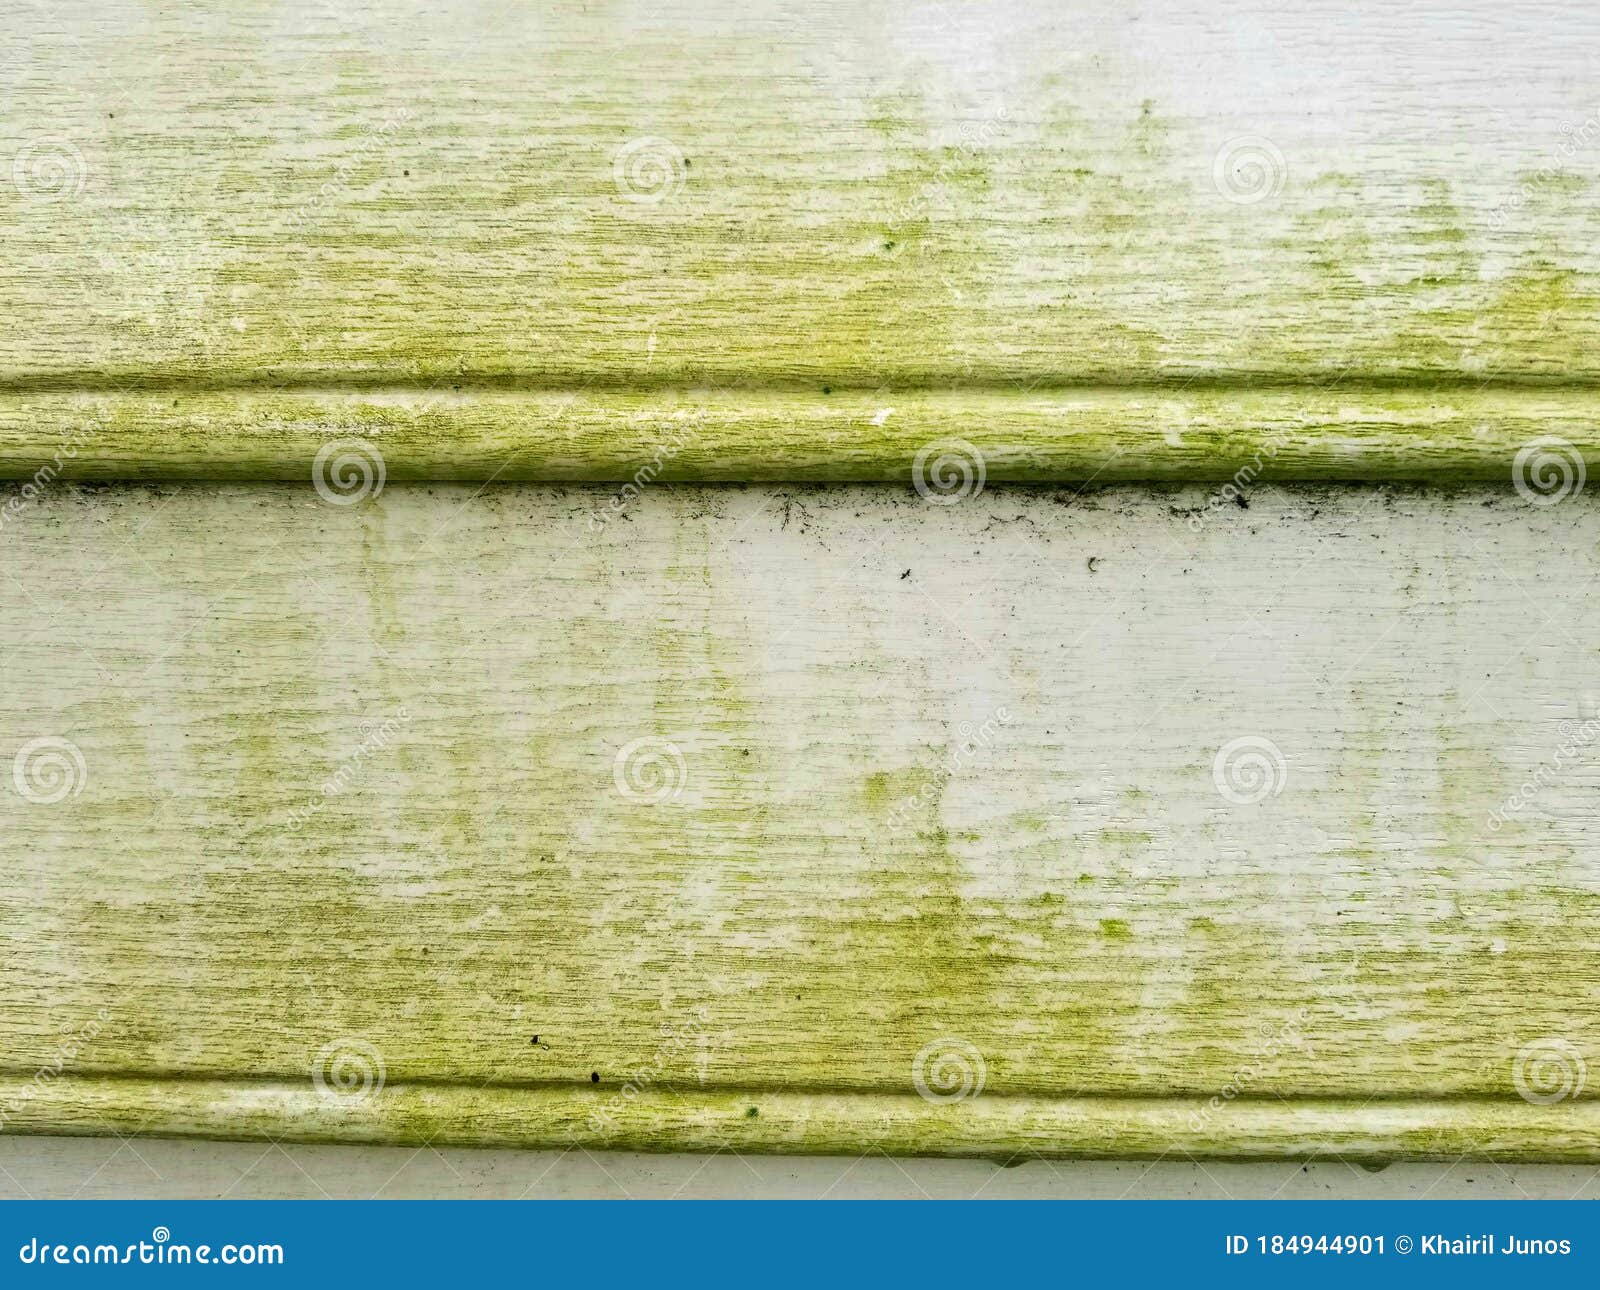 What is the Green Stuff on Siding?